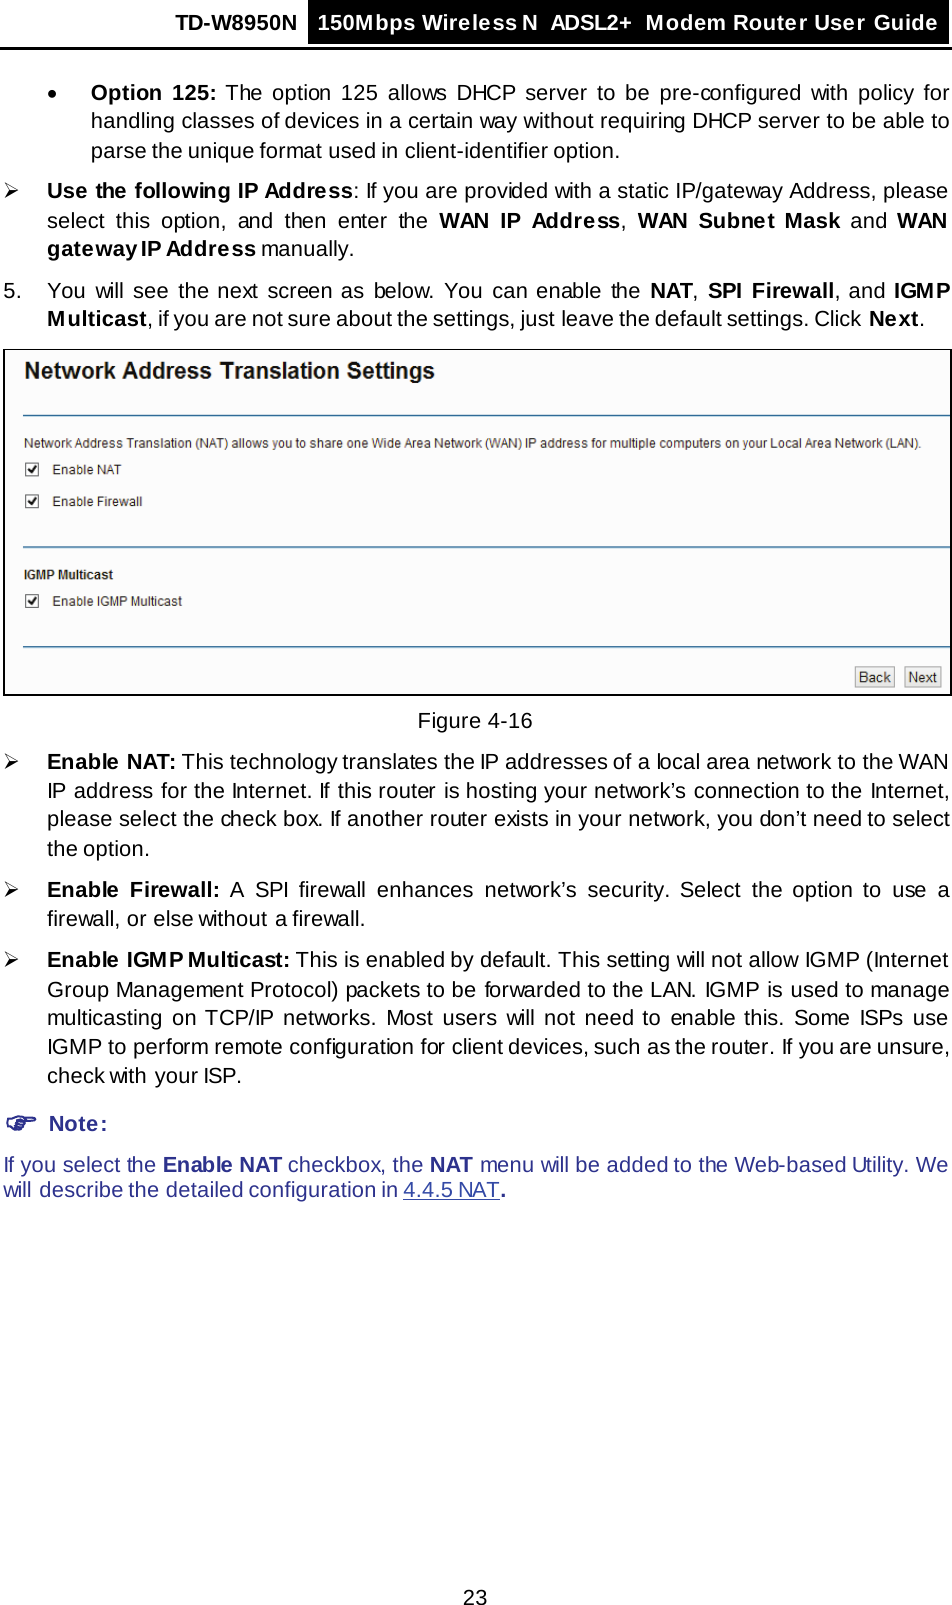 TD-W8950N 150Mbps Wireless N  ADSL2+ Modem Router User Guide  23 • Option 125: The option 125 allows DHCP server to be pre-configured with policy for handling classes of devices in a certain way without requiring DHCP server to be able to parse the unique format used in client-identifier option.   Use the following IP Address: If you are provided with a static IP/gateway Address, please select  this option,  and  then enter the WAN IP Address,  WAN Subnet Mask and  WAN gateway IP Address manually. 5.  You will see the next screen as below. You can enable the NAT,  SPI  Firewall,  and IGM P Multicast, if you are not sure about the settings, just leave the default settings. Click Next.  Figure 4-16  Enable NAT: This technology translates the IP addresses of a local area network to the WAN IP address for the Internet. If this router is hosting your network’s connection to the Internet, please select the check box. If another router exists in your network, you don’t need to select the option.  Enable Firewall:  A  SPI  firewall enhances network’s security.  Select the option to use a firewall, or else without a firewall.  Enable IGMP Multicast: This is enabled by default. This setting will not allow IGMP (Internet Group Management Protocol) packets to be forwarded to the LAN. IGMP is used to manage multicasting on TCP/IP networks. Most users will not need to enable this. Some ISPs use IGMP to perform remote configuration for client devices, such as the router. If you are unsure, check with your ISP.  Note: If you select the Enable NAT checkbox, the NAT menu will be added to the Web-based Utility. We will describe the detailed configuration in 4.4.5 NAT. 